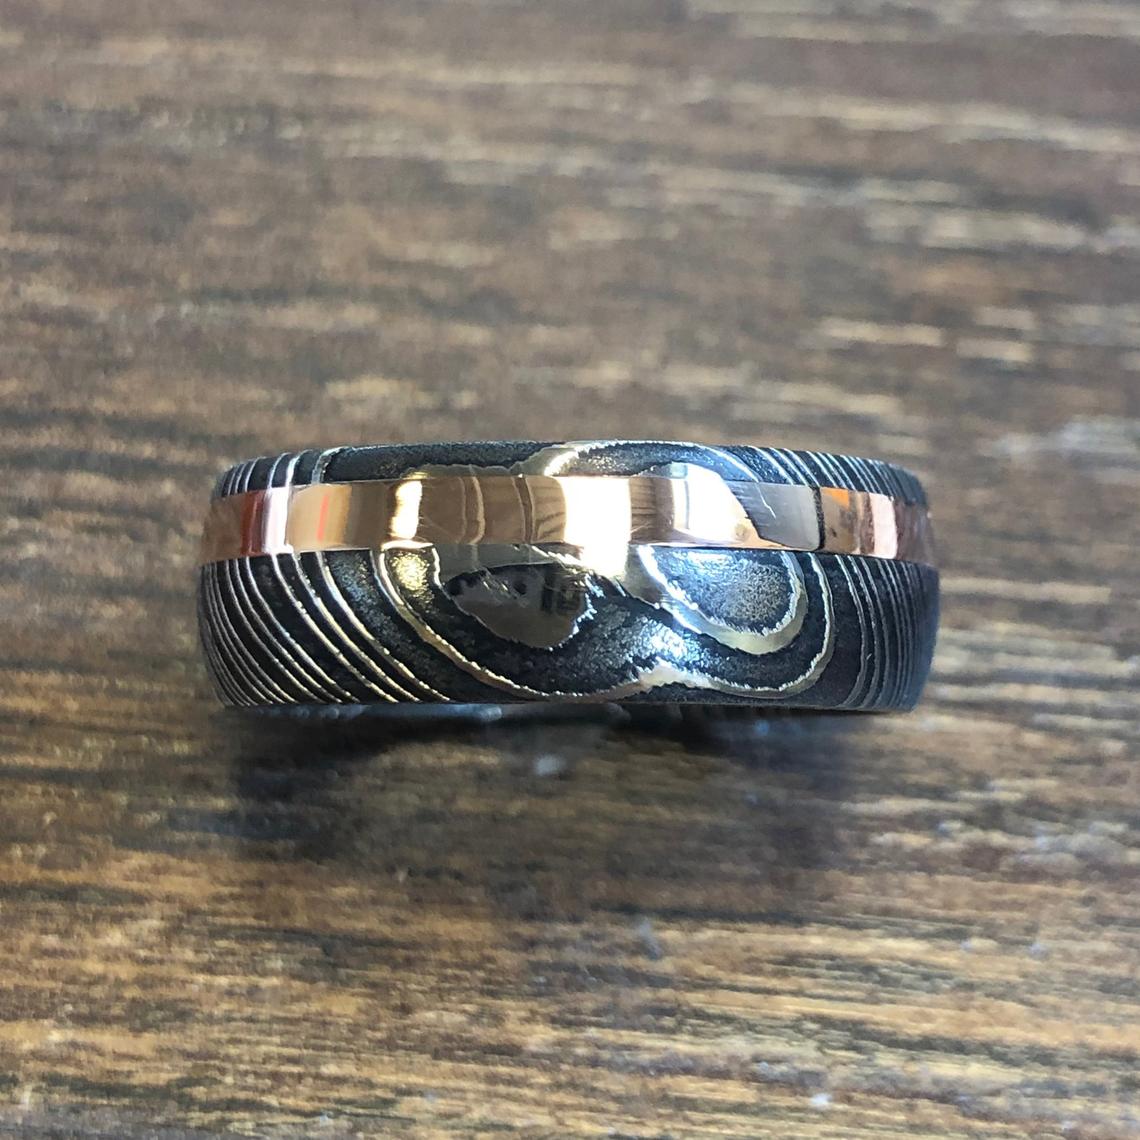 8mm wide black Damascus steel wedding band with a 2mm wide rose gold inlay and rounded profile